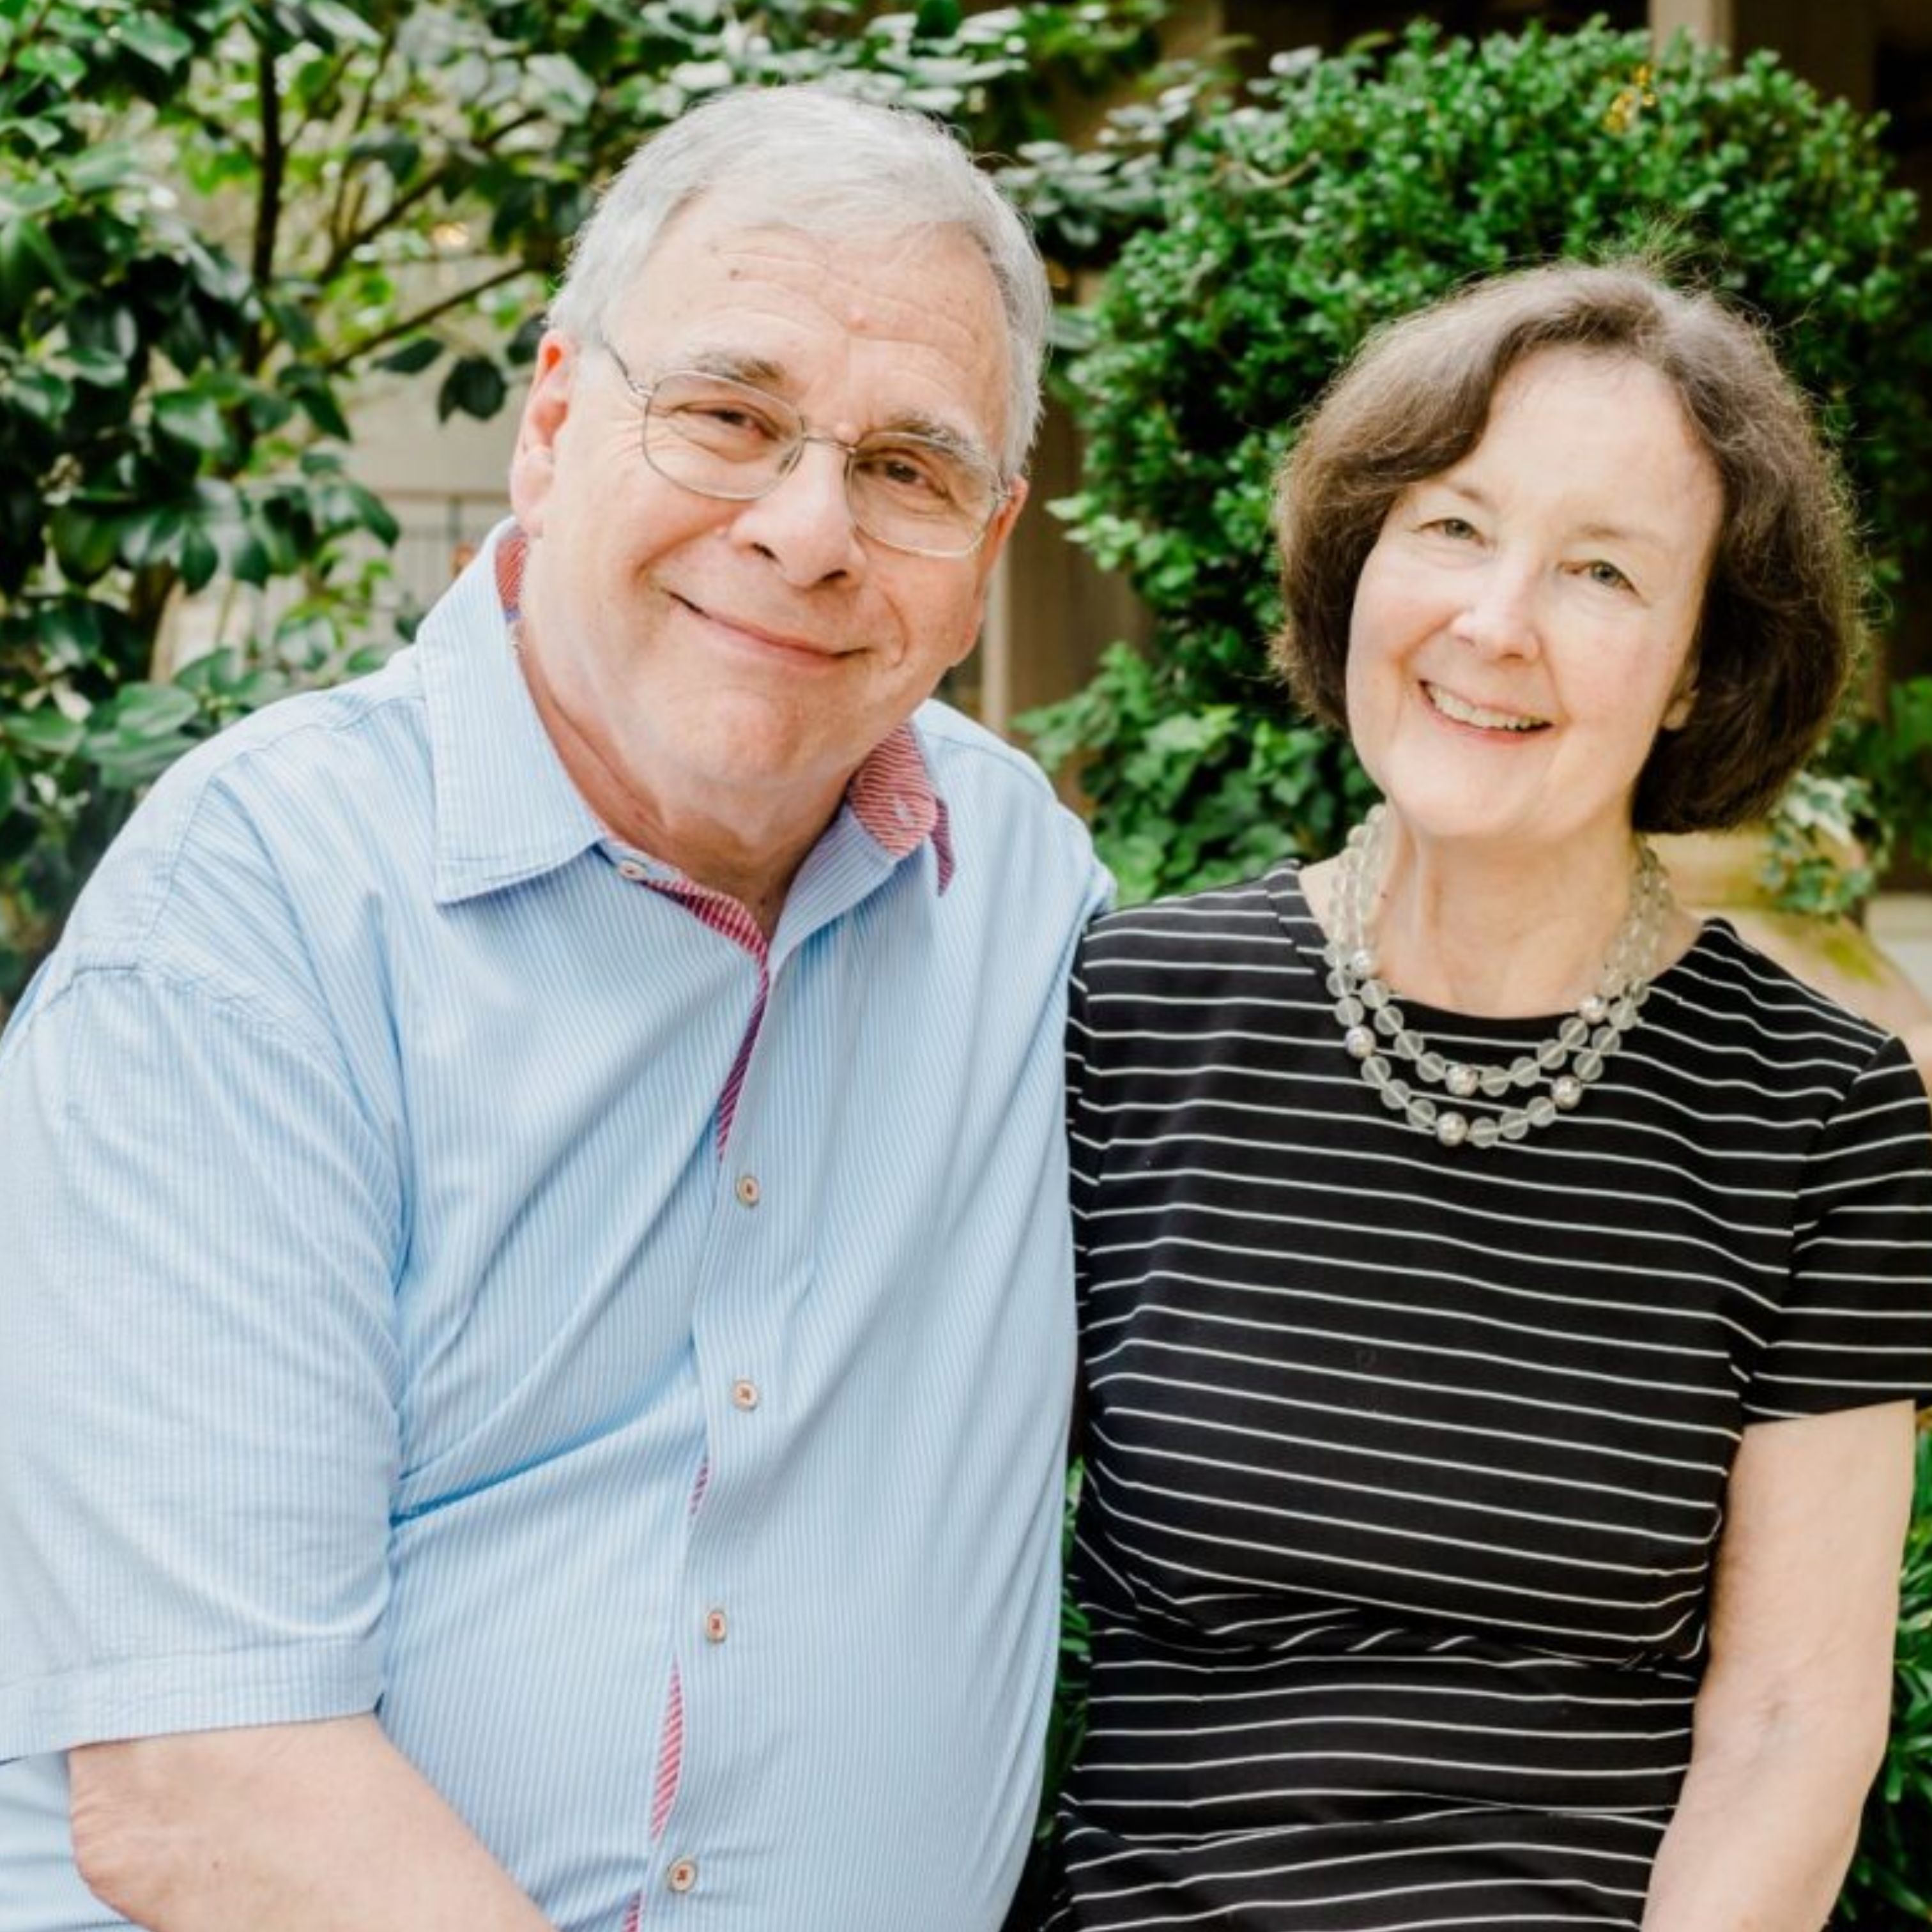 Profile picture of Dr. Dick Krugman with his late wife, Dr. Mary Krugman.